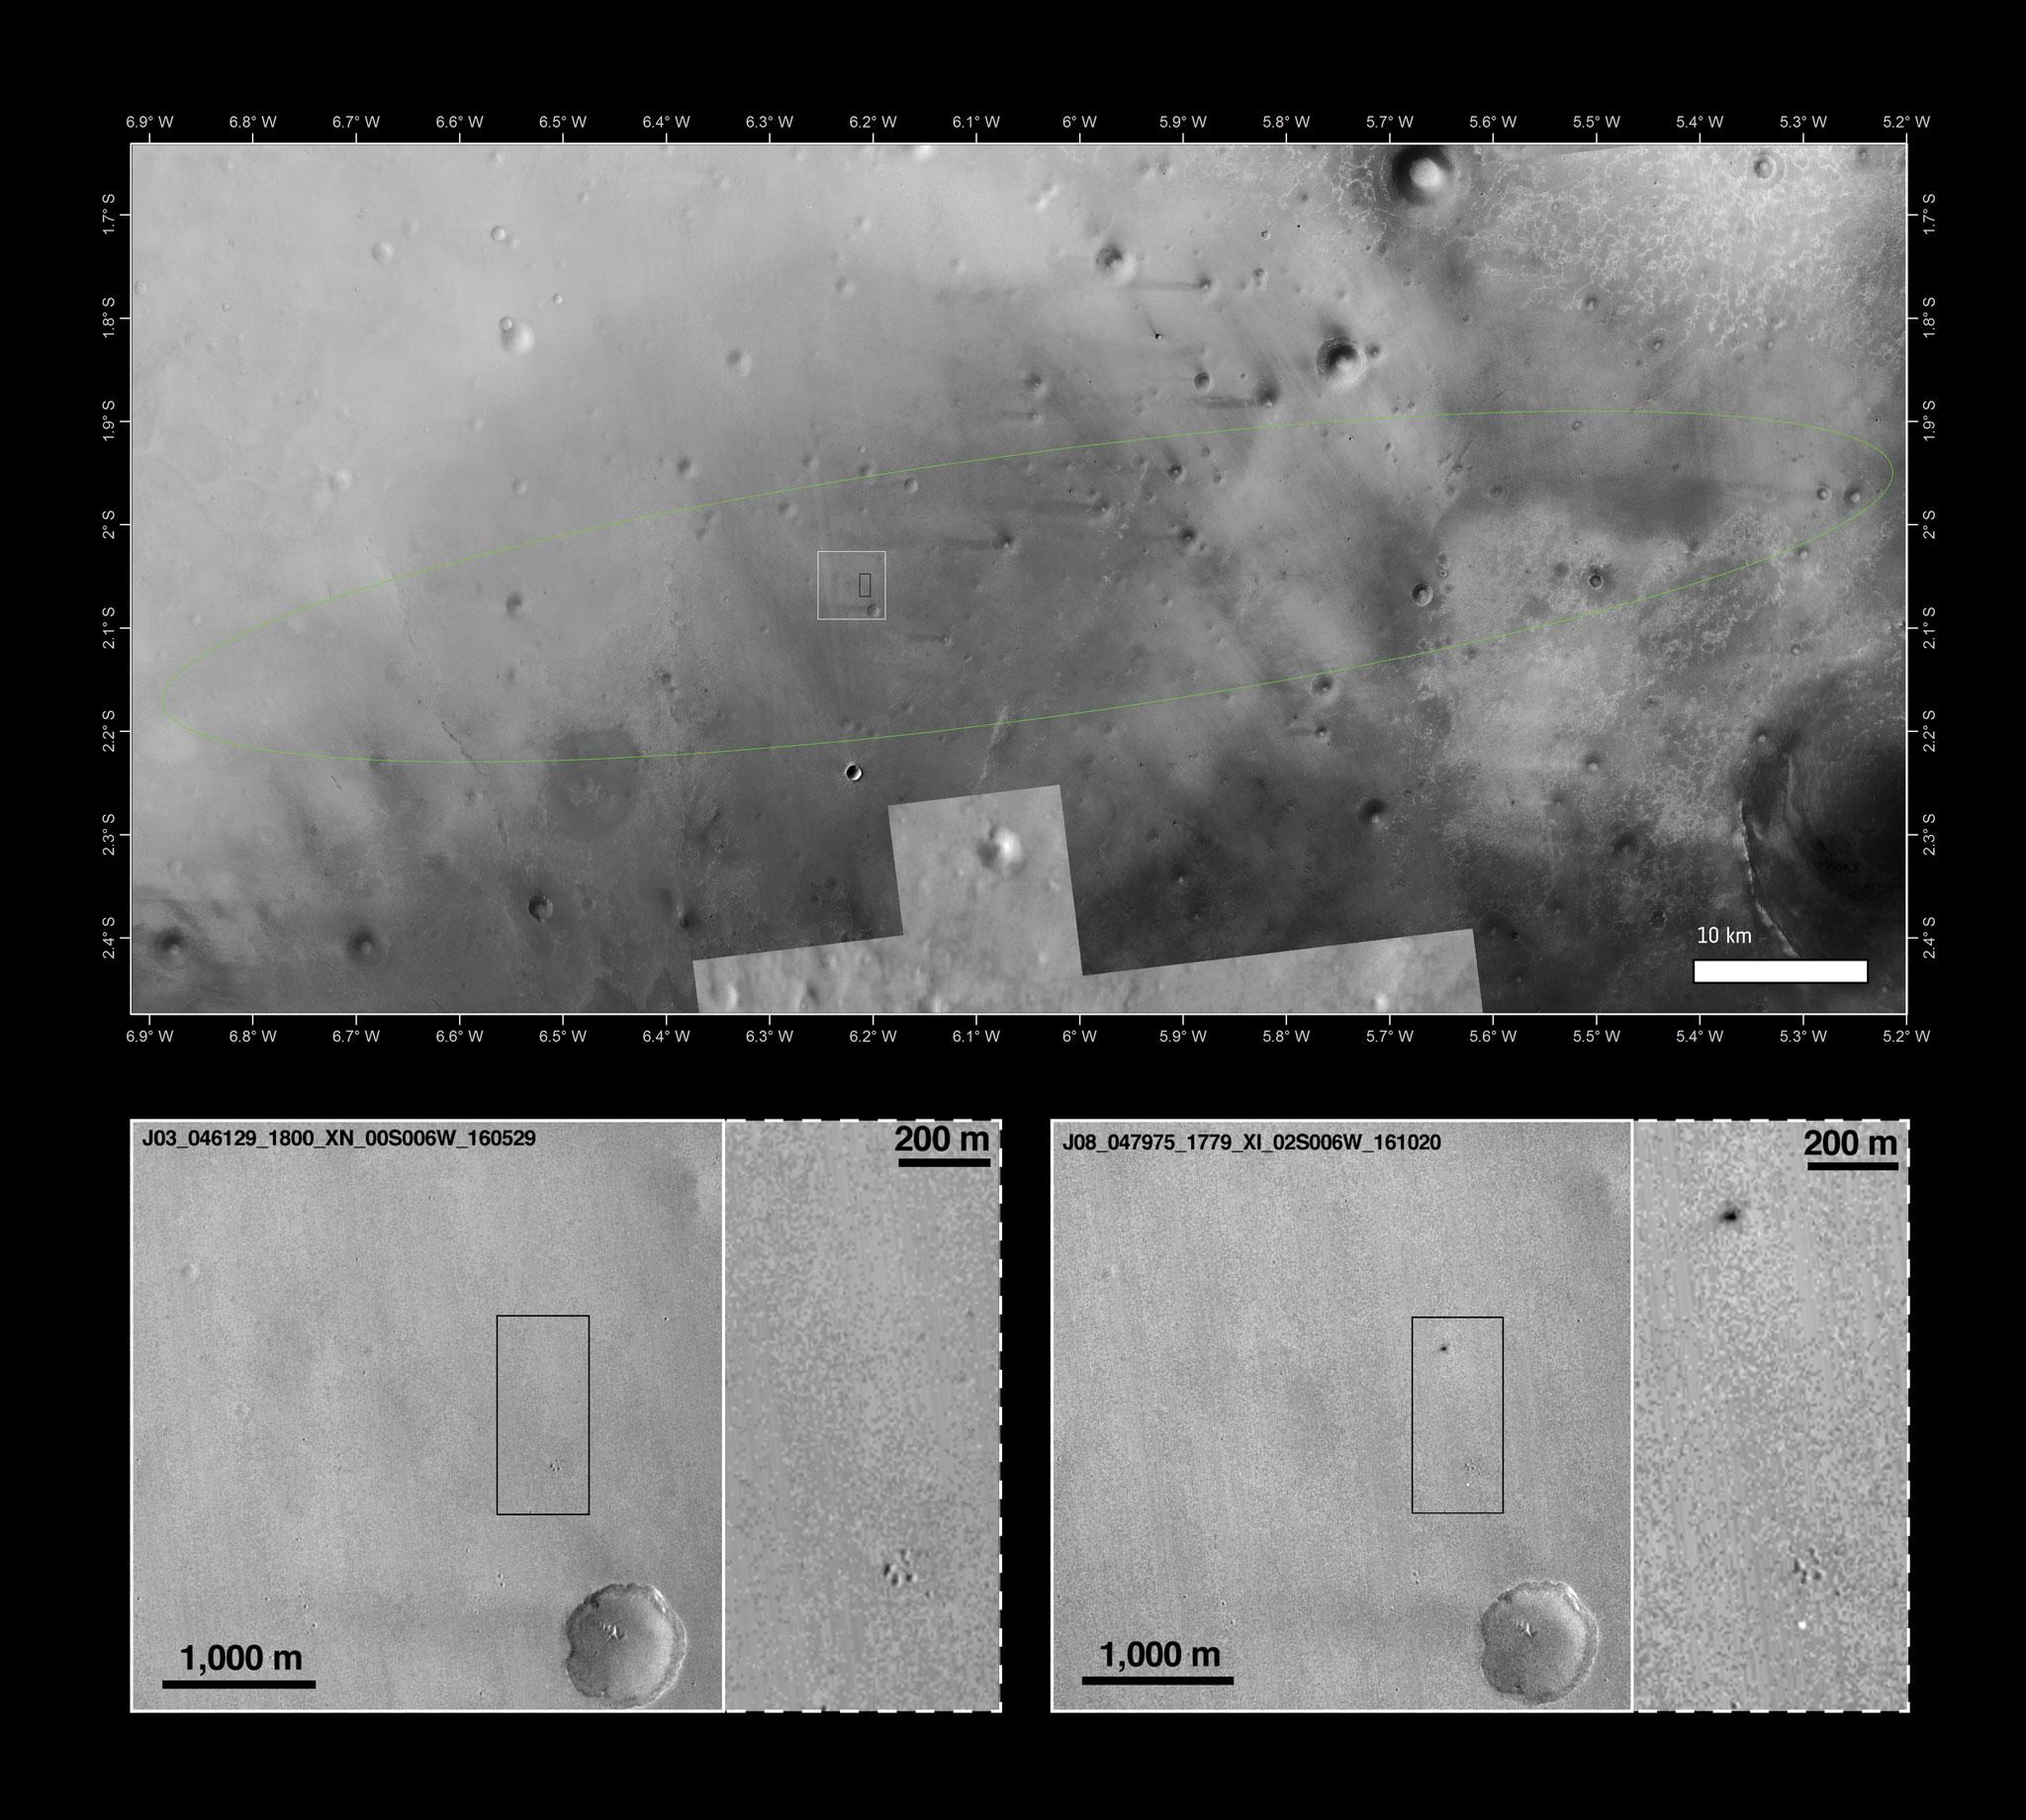 Images of the Schiaparelli landing site captured by the NASA orbiter